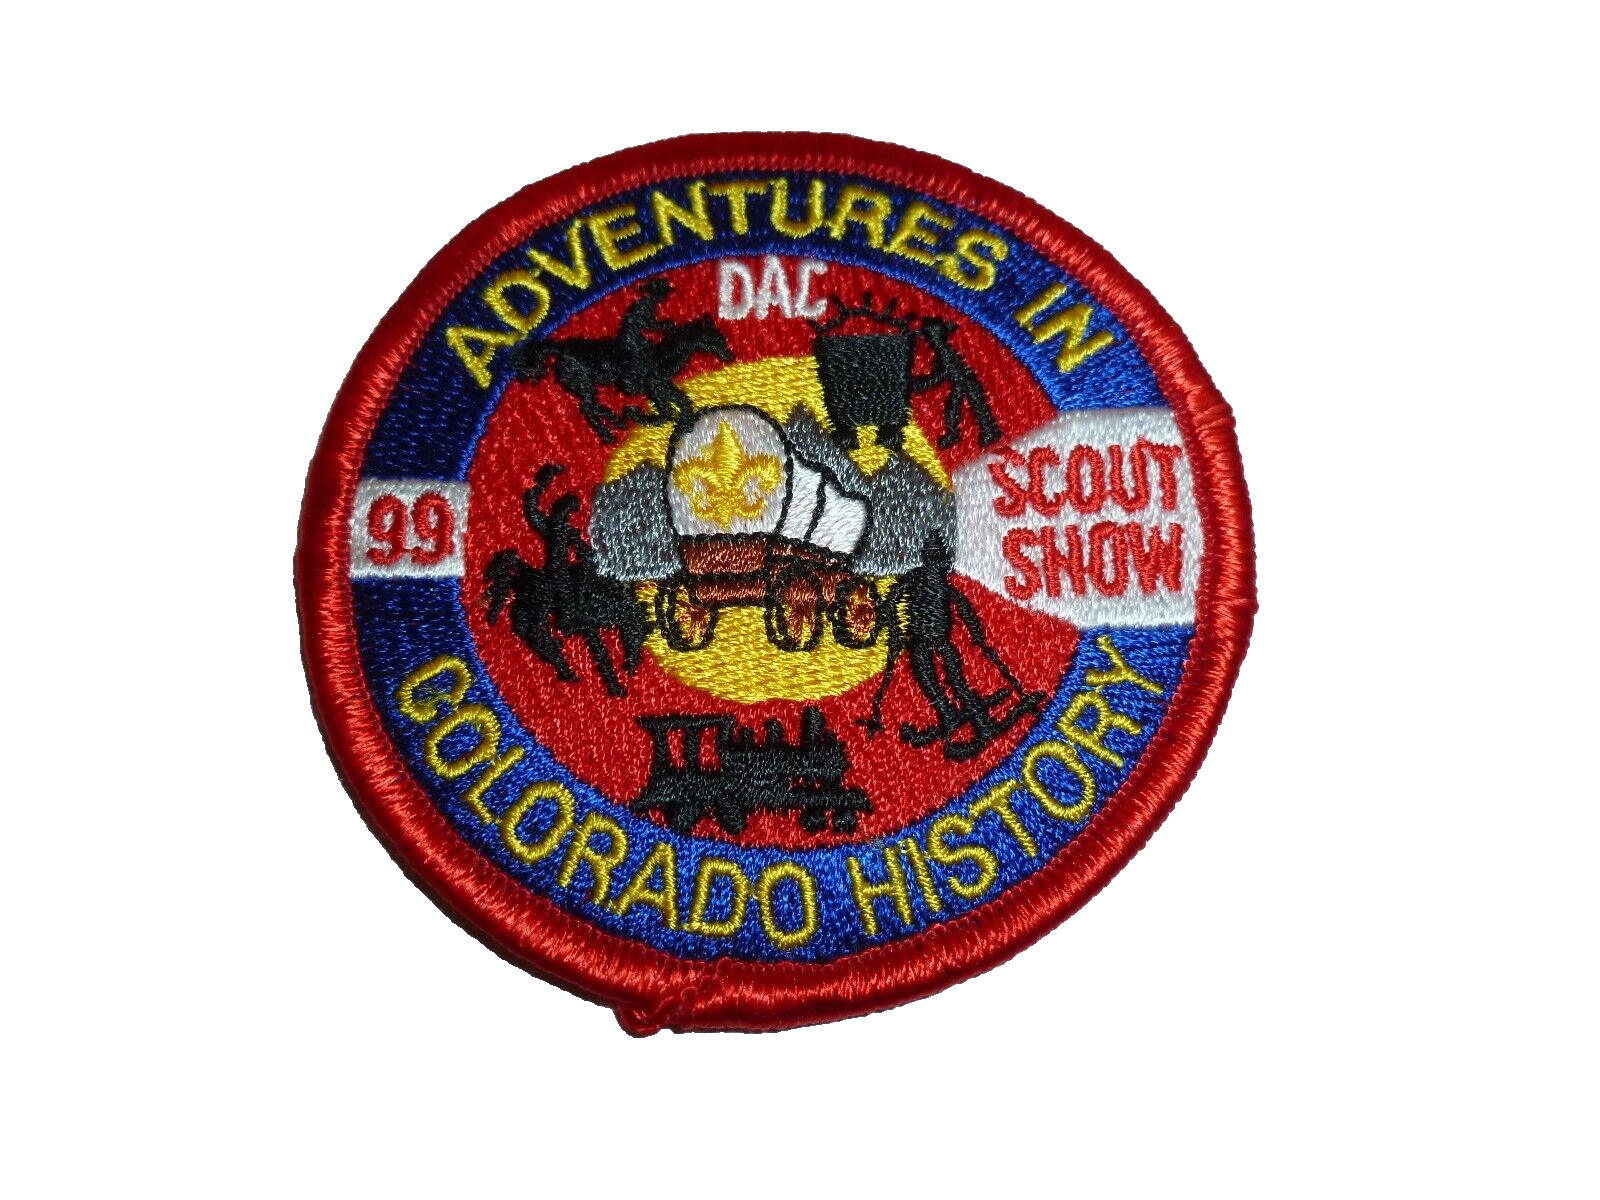 Adventures in Colorado History 1999 Scout Show Patch Vintage